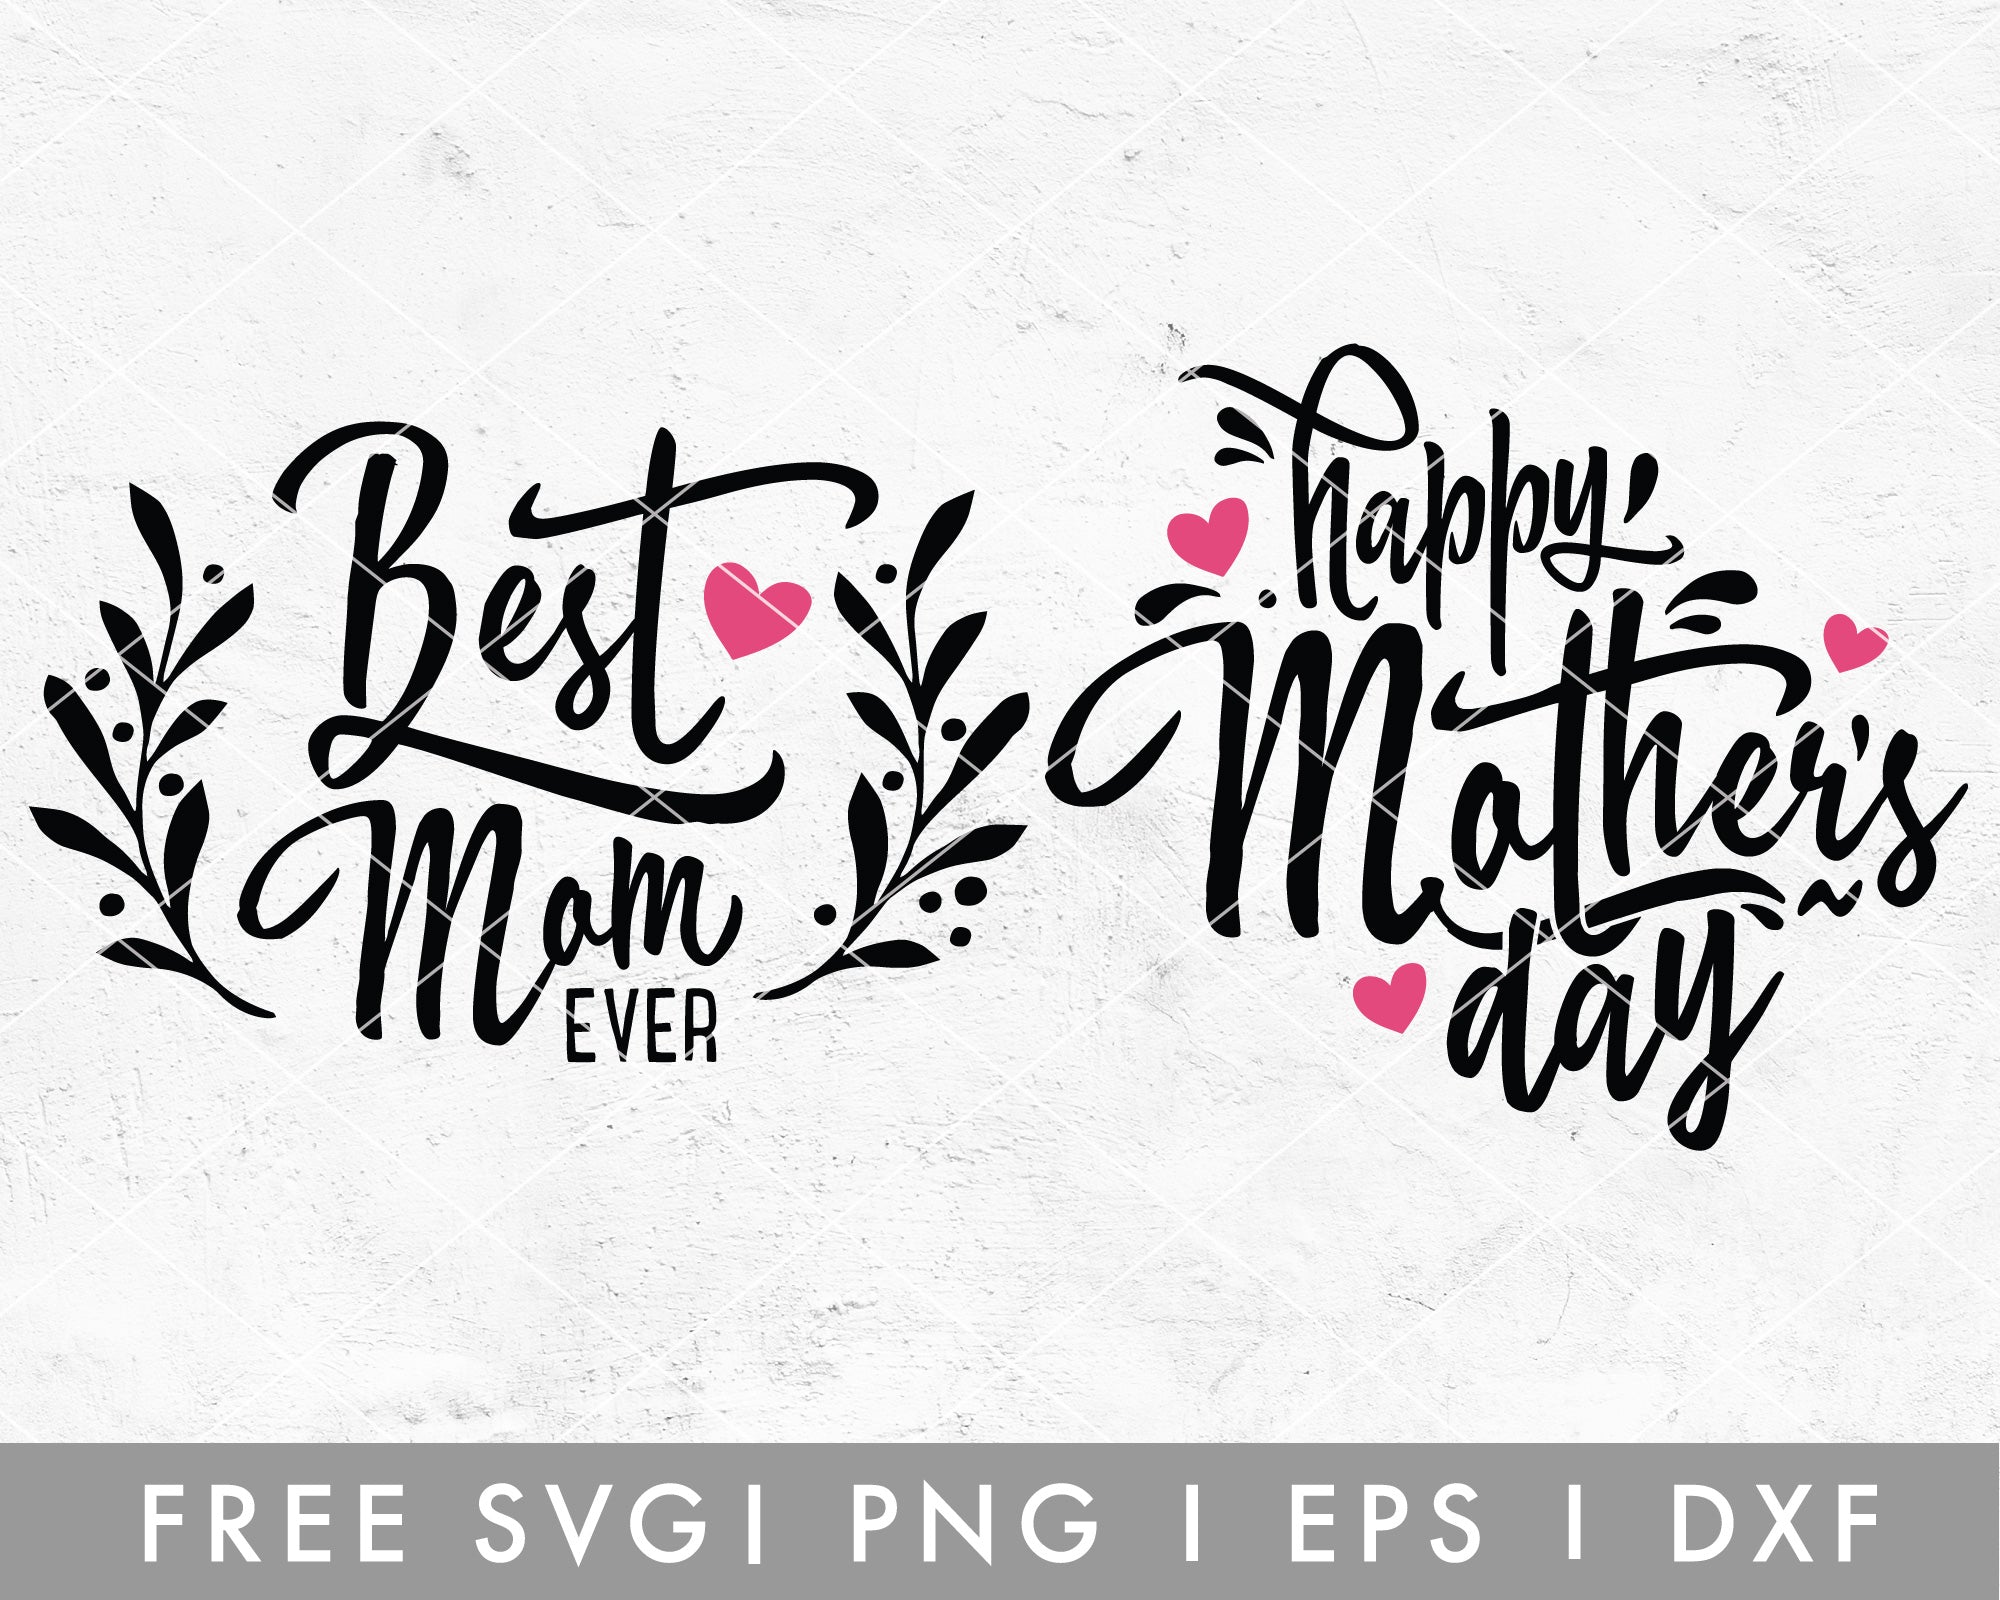 best mama ever svg, mama svg, mother's day svg, love mom svg, Dxf, Png,  Eps, jpeg, Cut file, Cricut, Silhouette, Print, Instant download